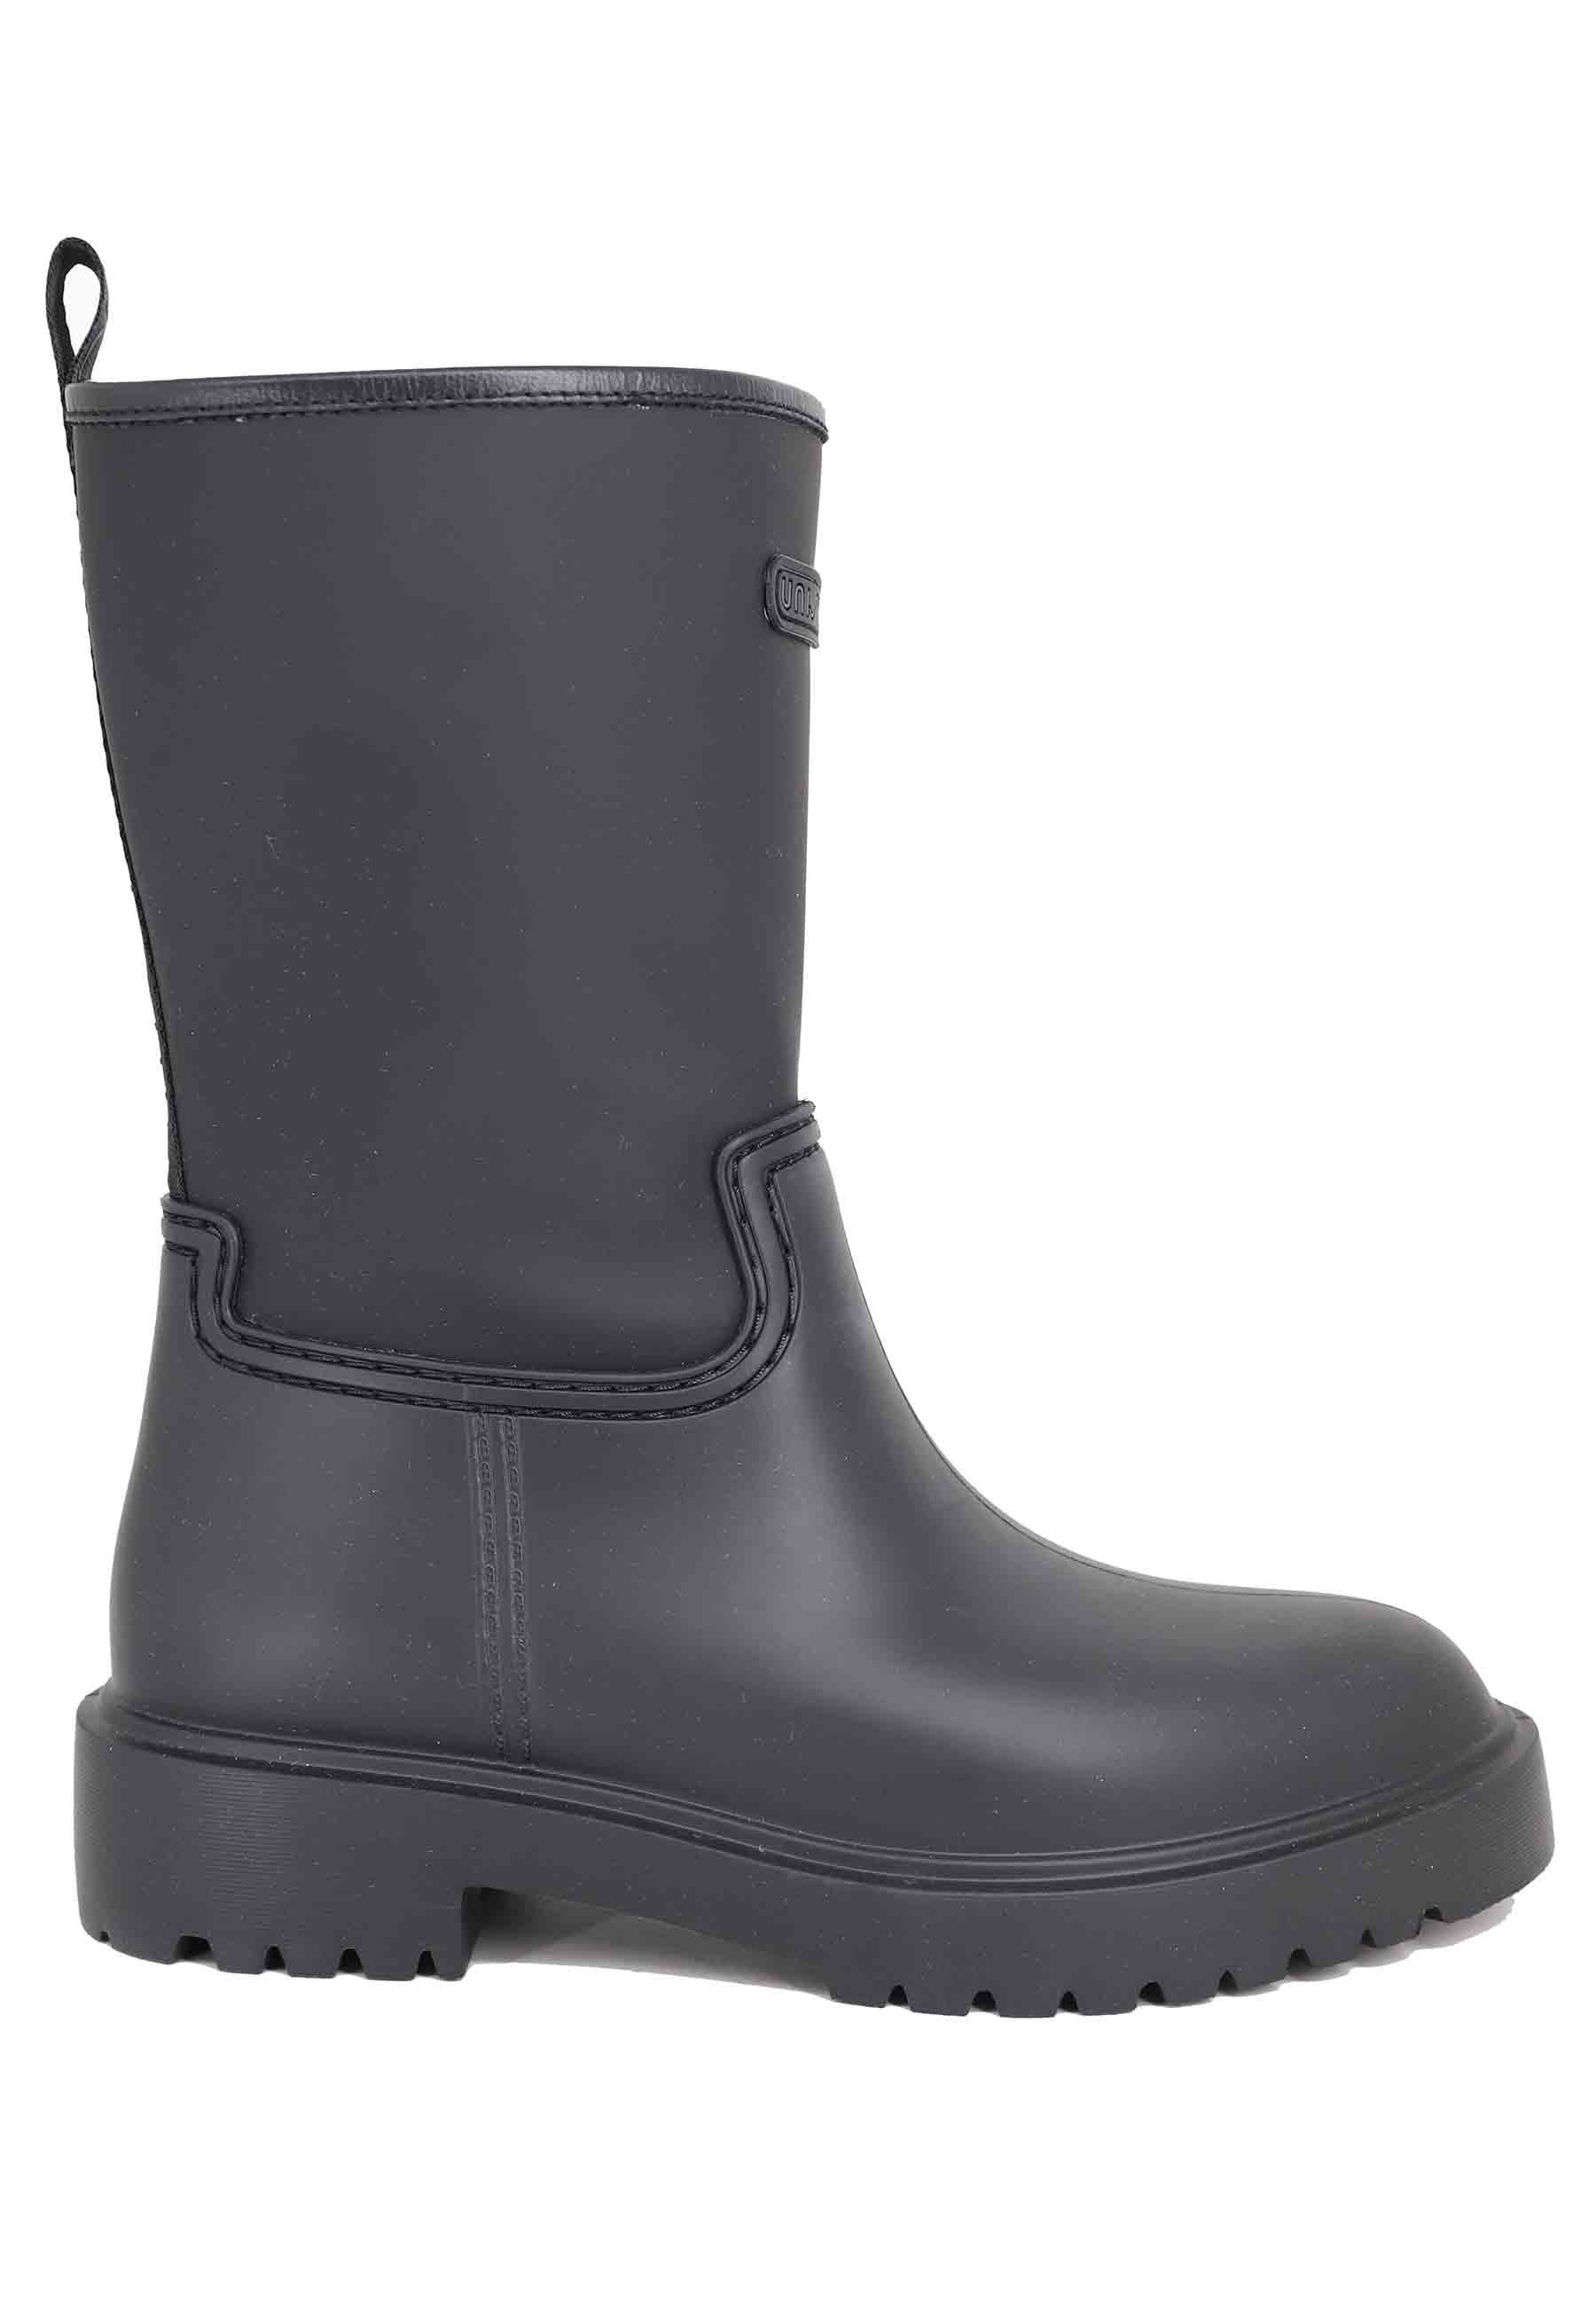 Women's rain boots in PVC and black fabric